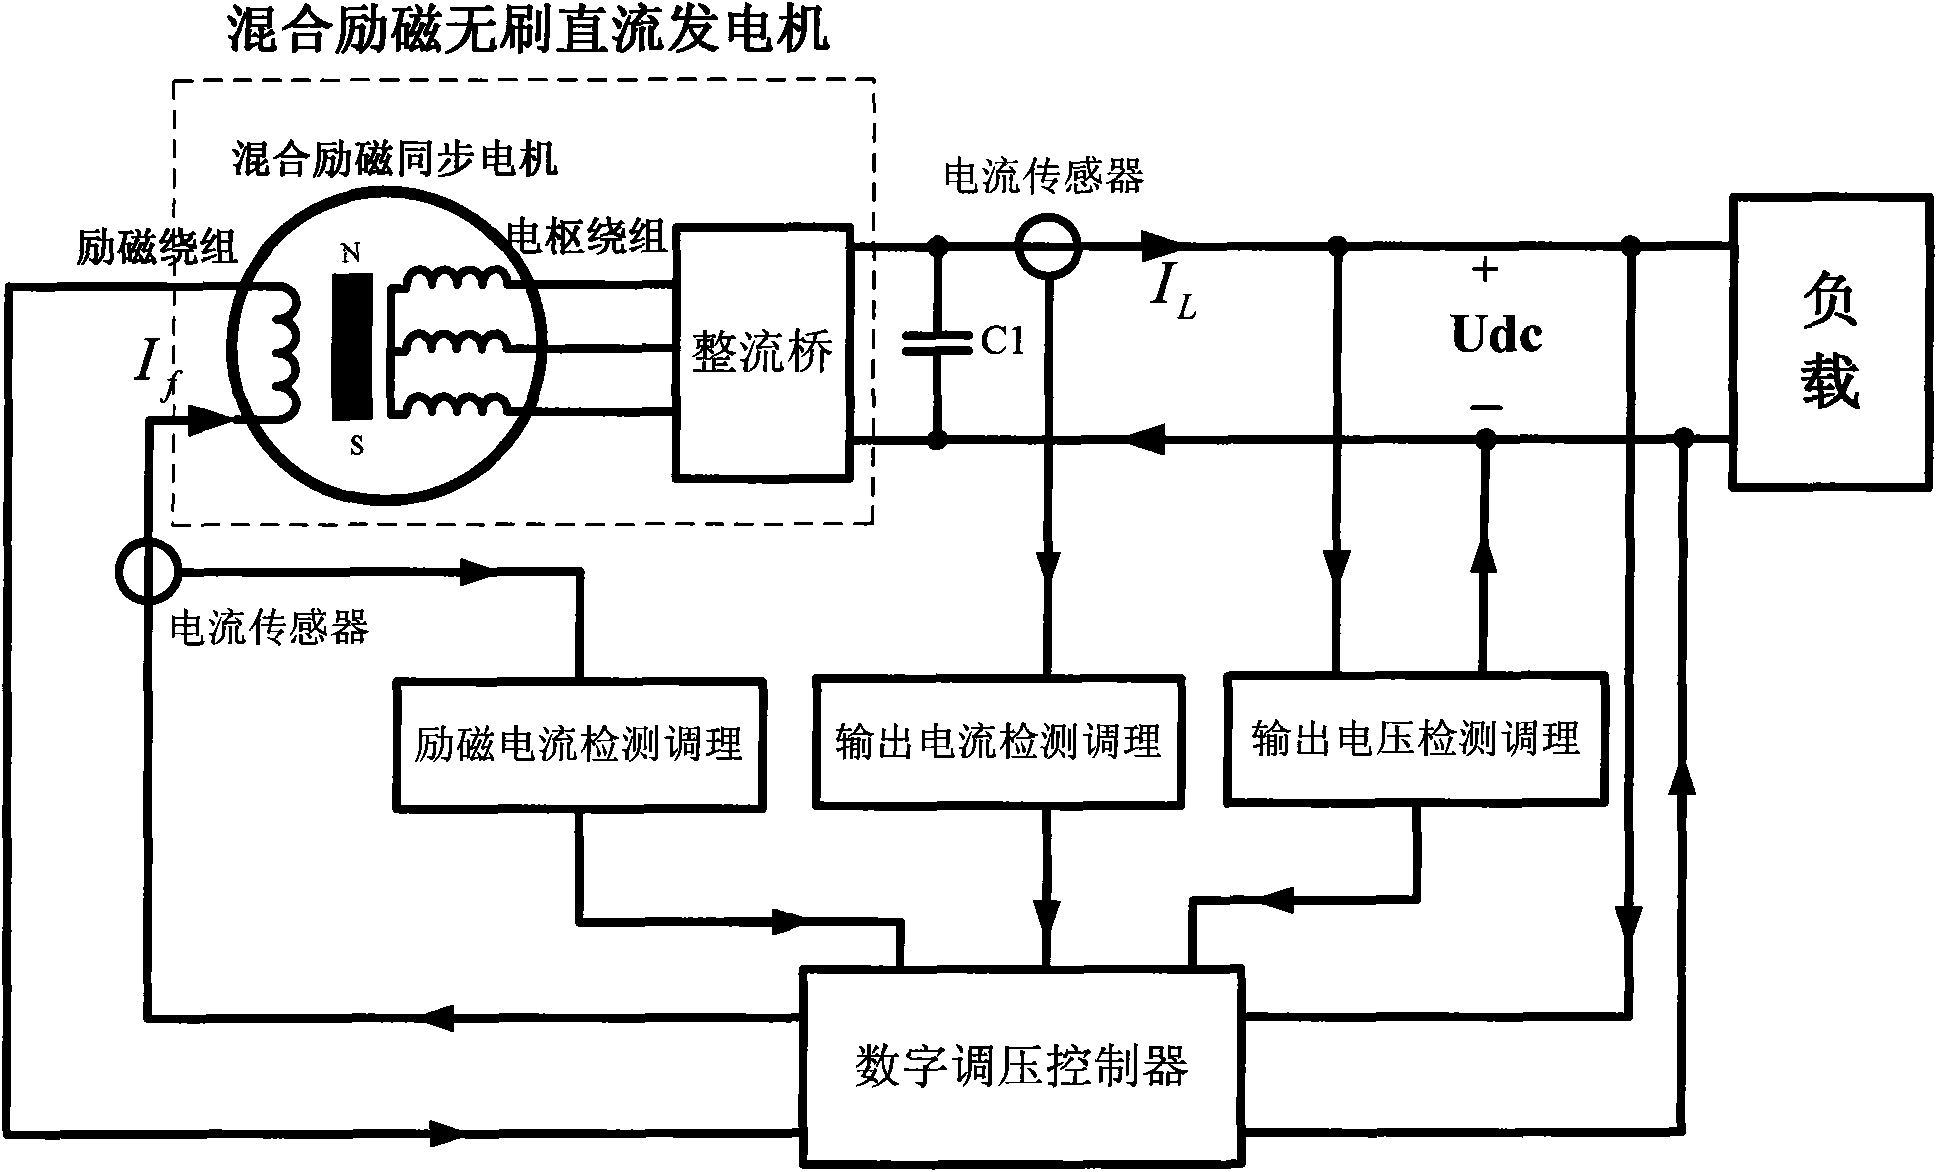 Self-excitation mixed-excitation brushless direct current power-generating system and control method thereof